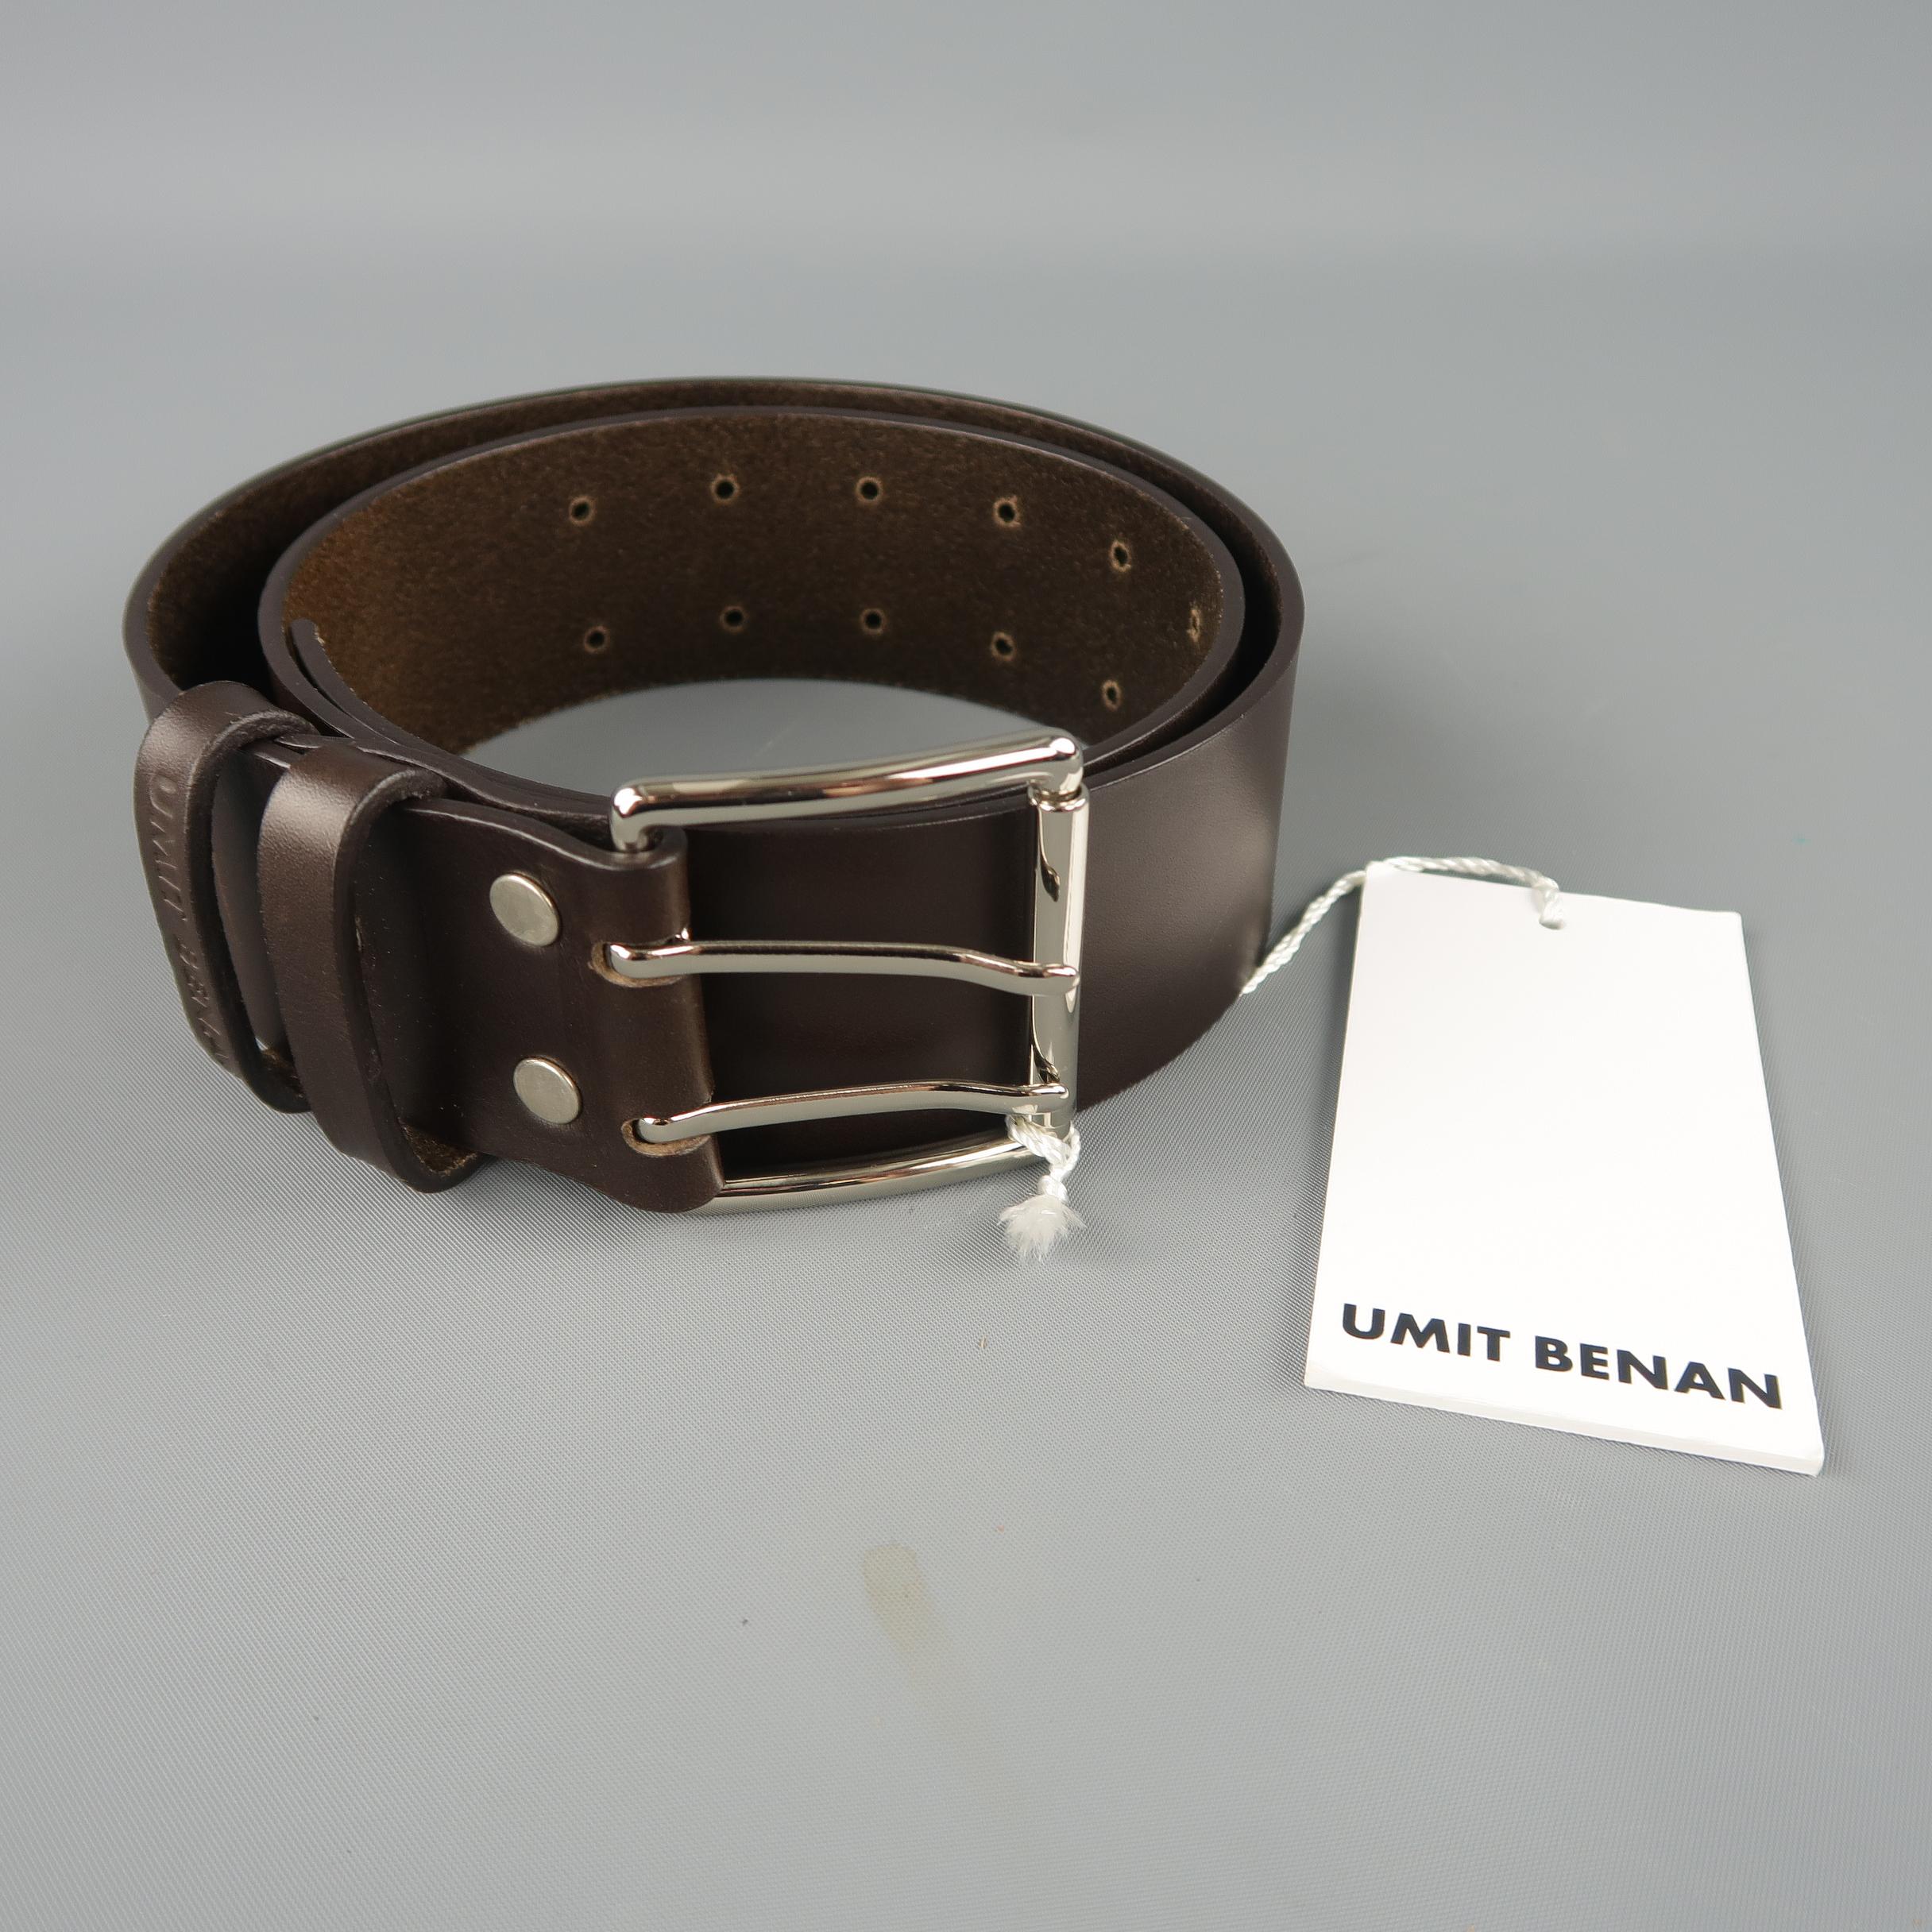 UMIT BENAN belt features a thick dark brown leather strap with a silver tone double prong buckle. Made in Italy.
 
New with Tags.
Marked: 84
 
Length: 40 in.
Width: 1.75 in.
Fits: 26-35 in.